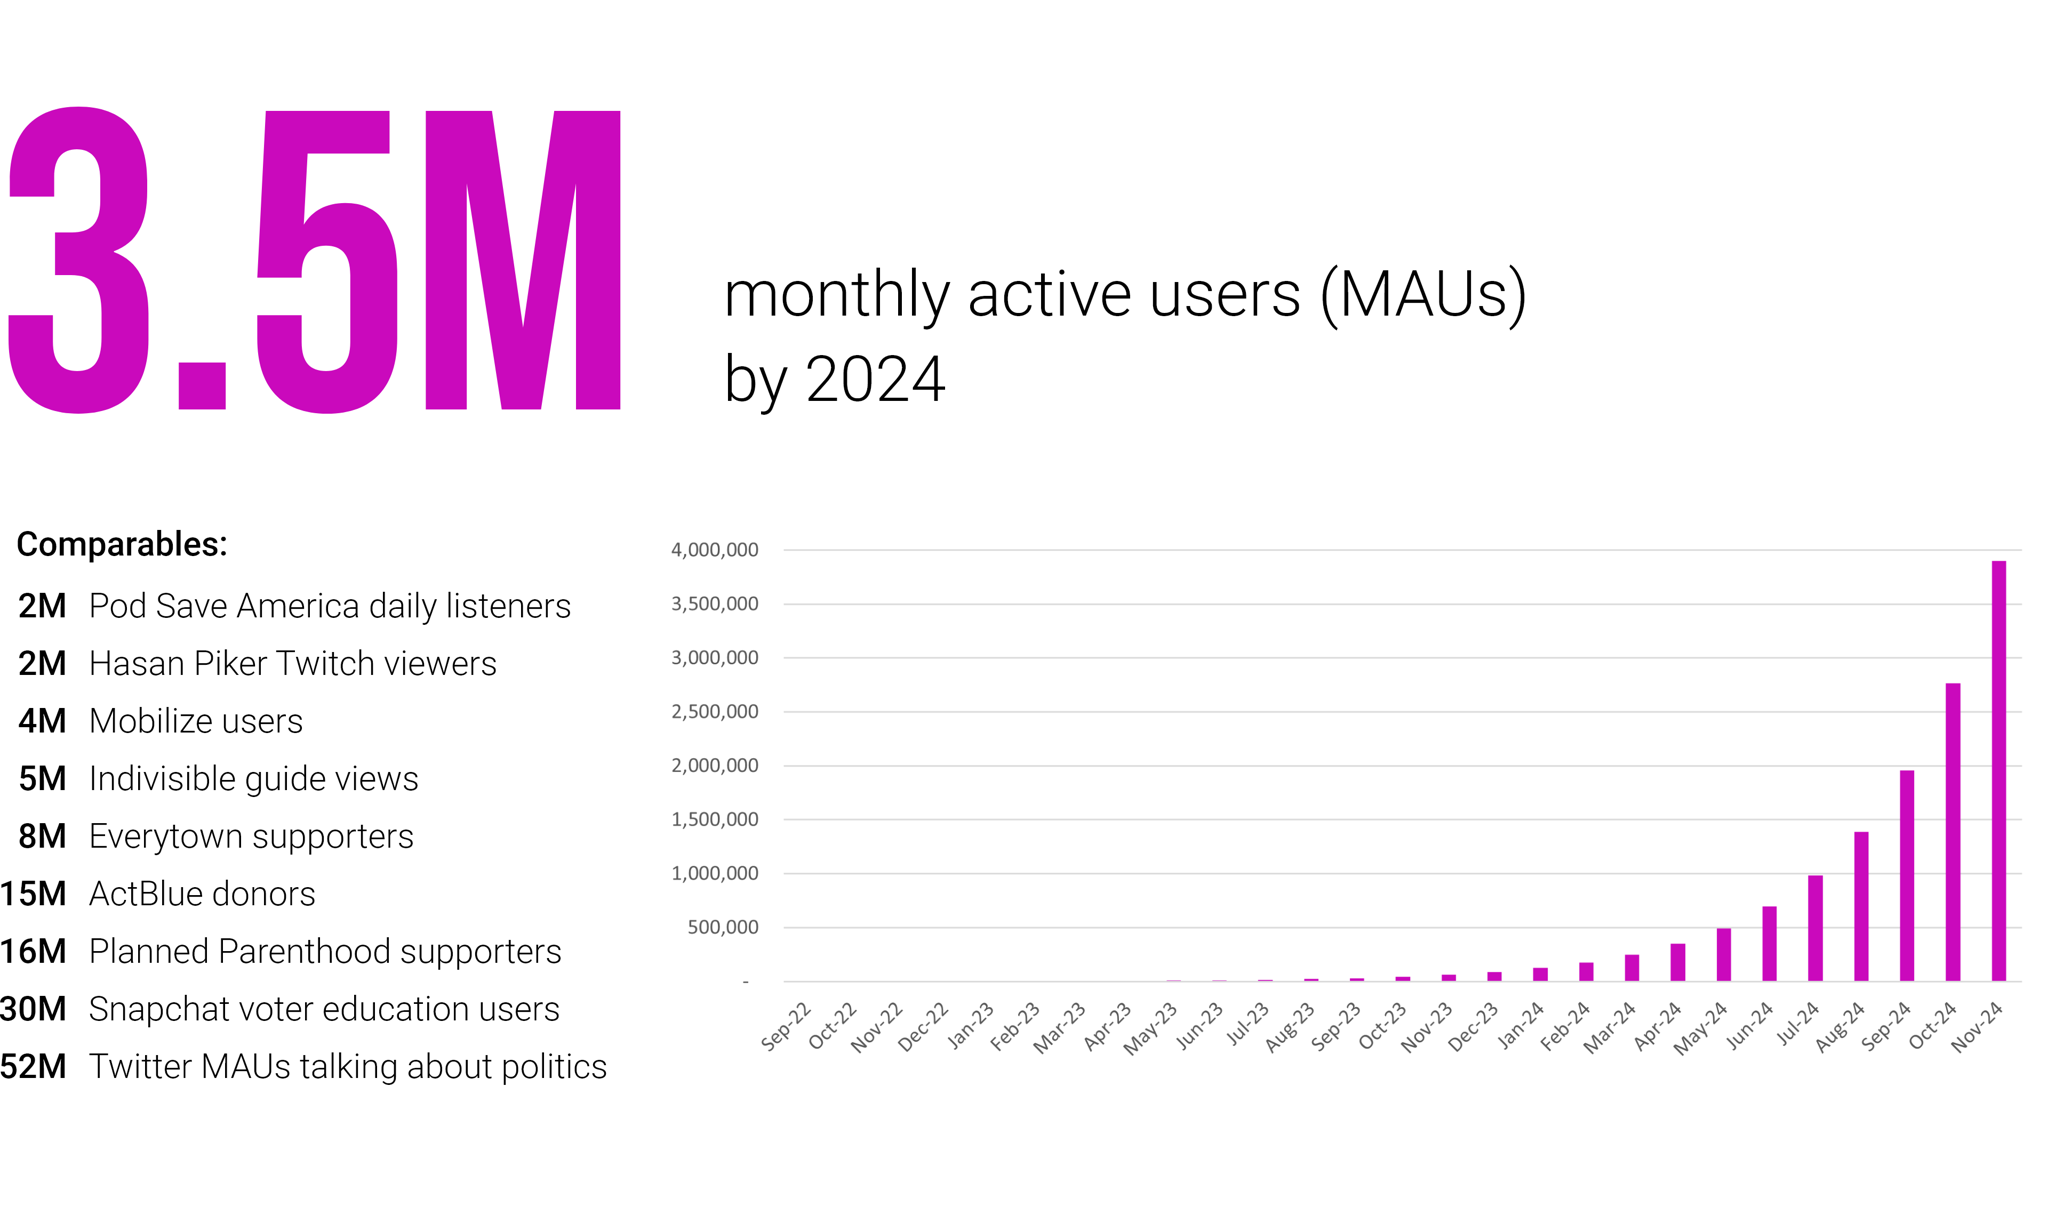 We project over 3 million users by 2024.